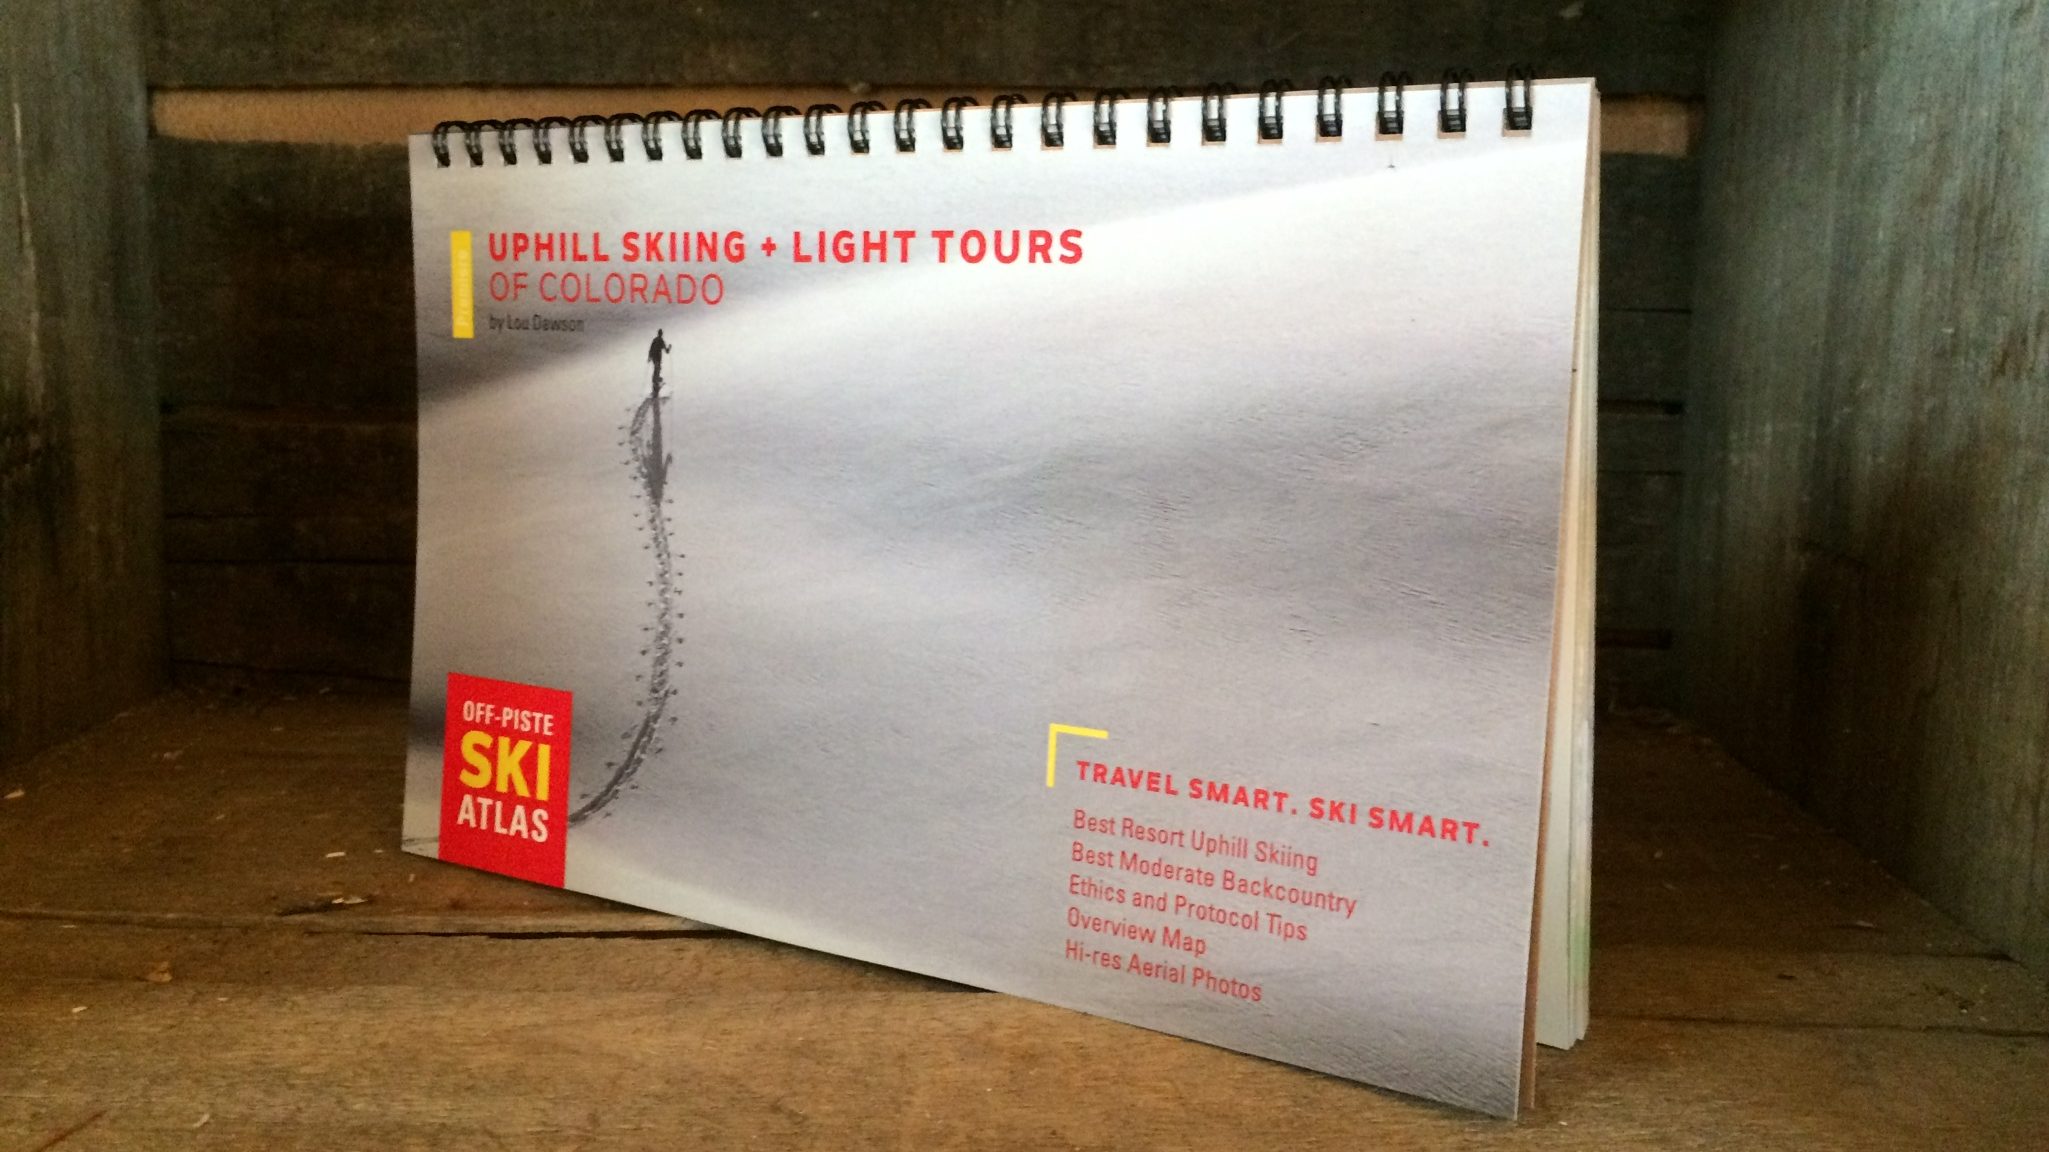 Uphill Skiing and Light Tours of Colorado.